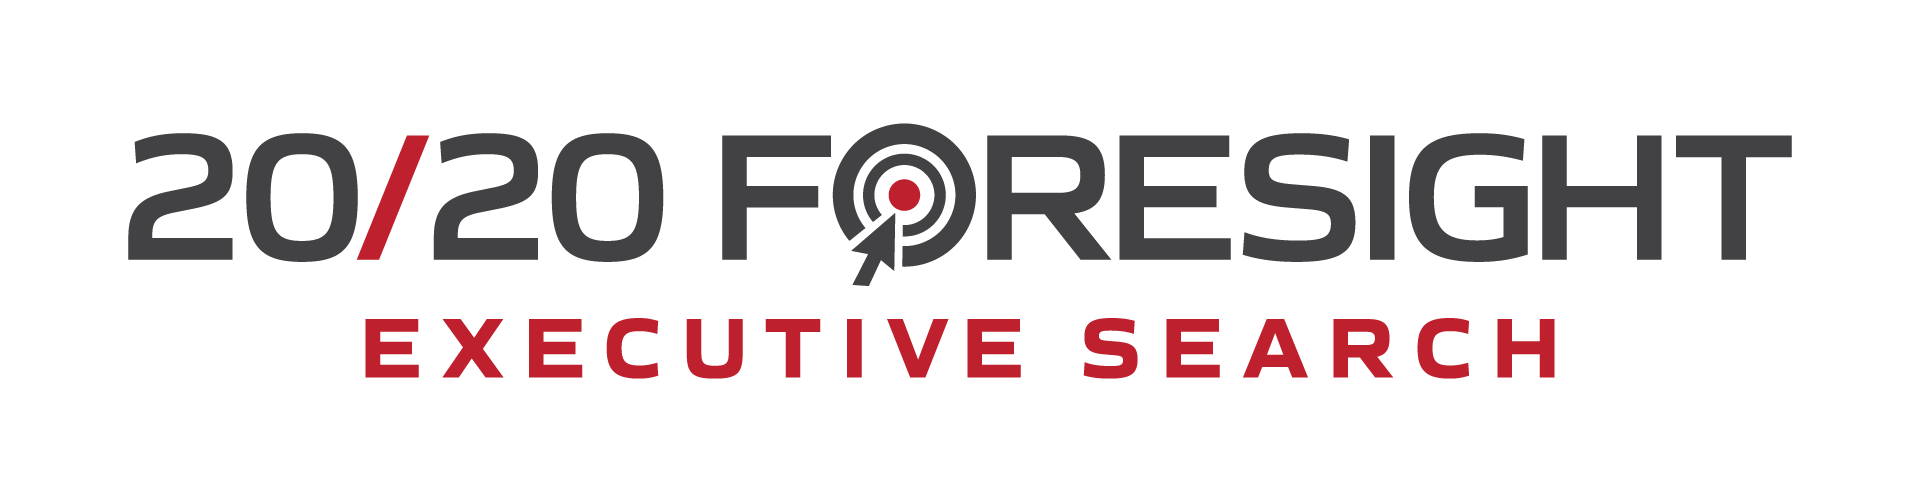 20/20 Foresight - Executive Search